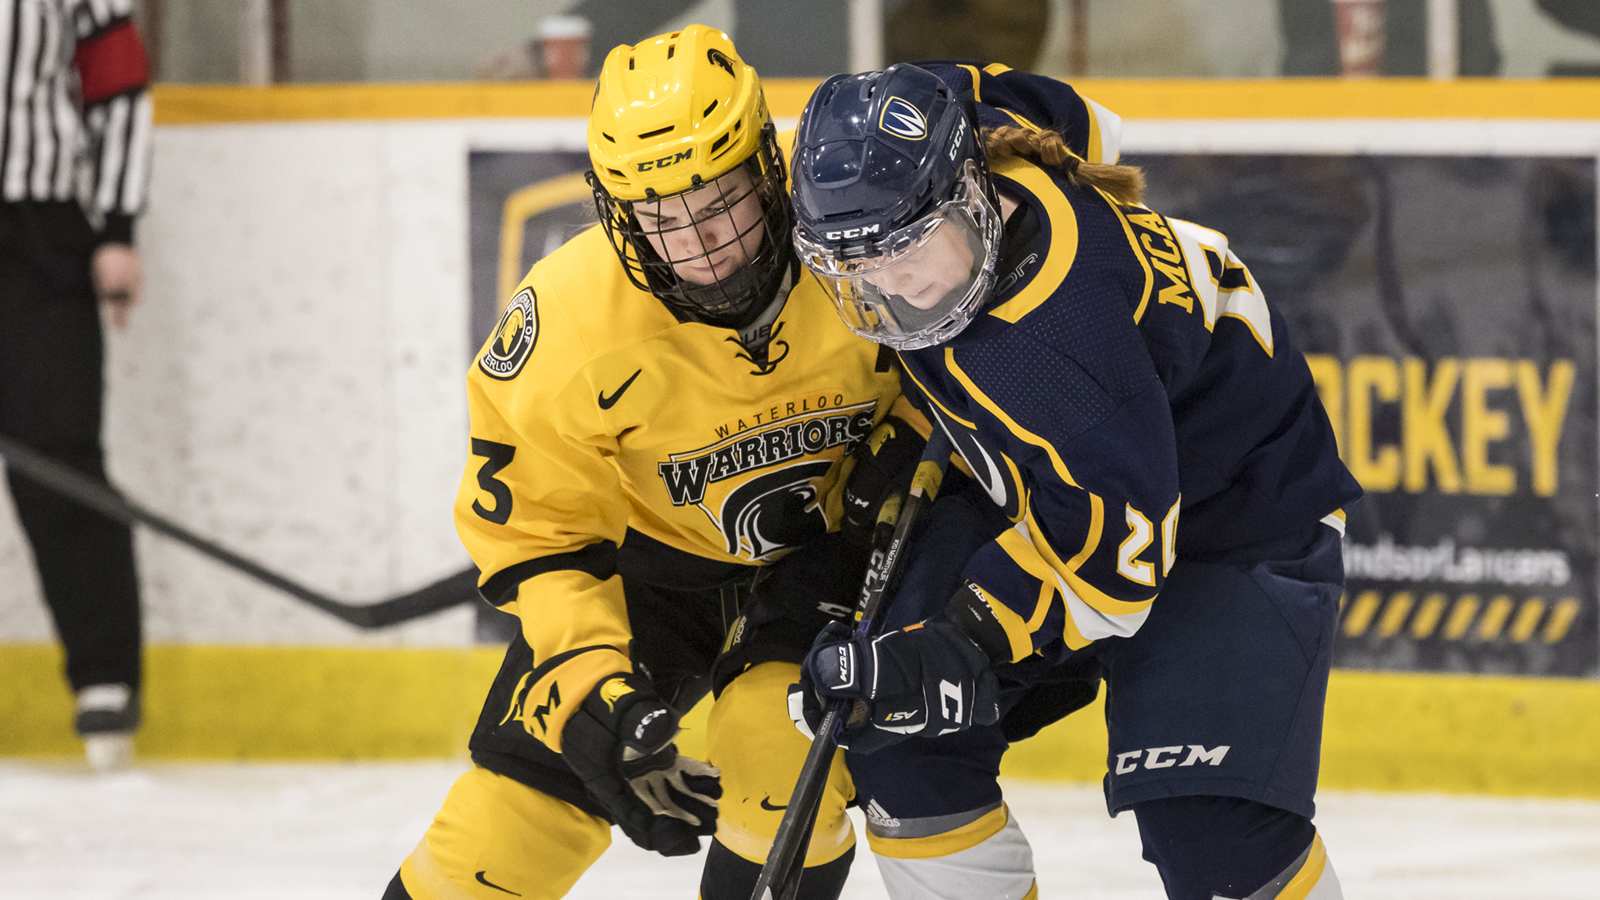 Women's hockey players from Waterloo Warriors and Windsor Lancers battling for the puck on the ice during a game